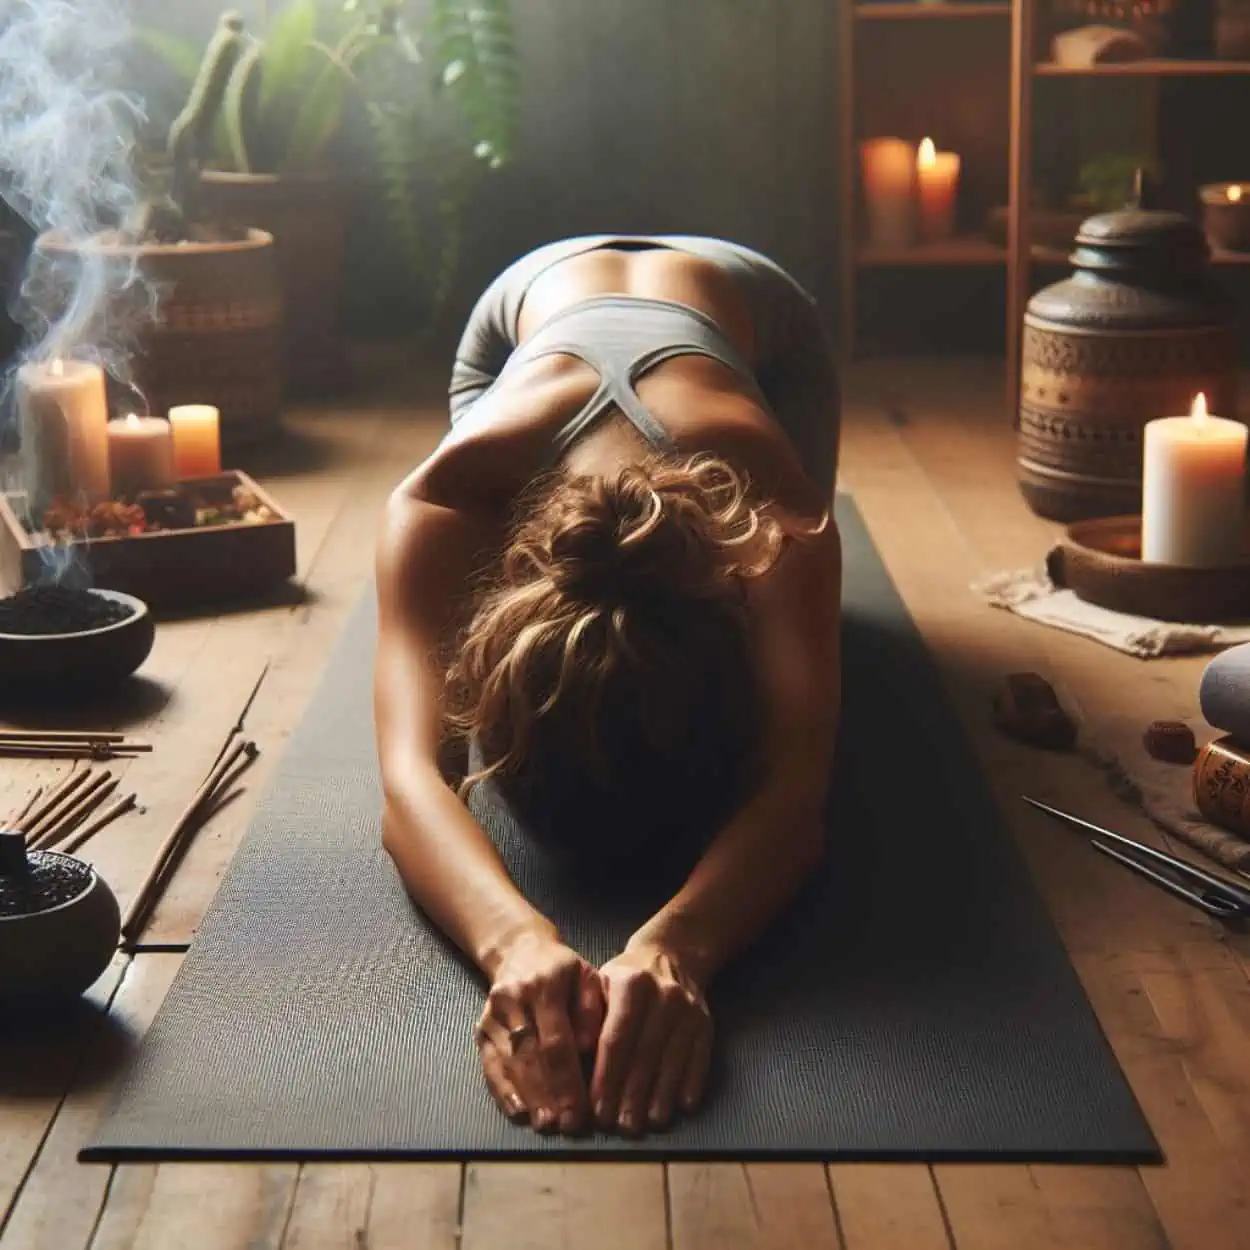 In this image a woman is doing yin yoga for digestive health